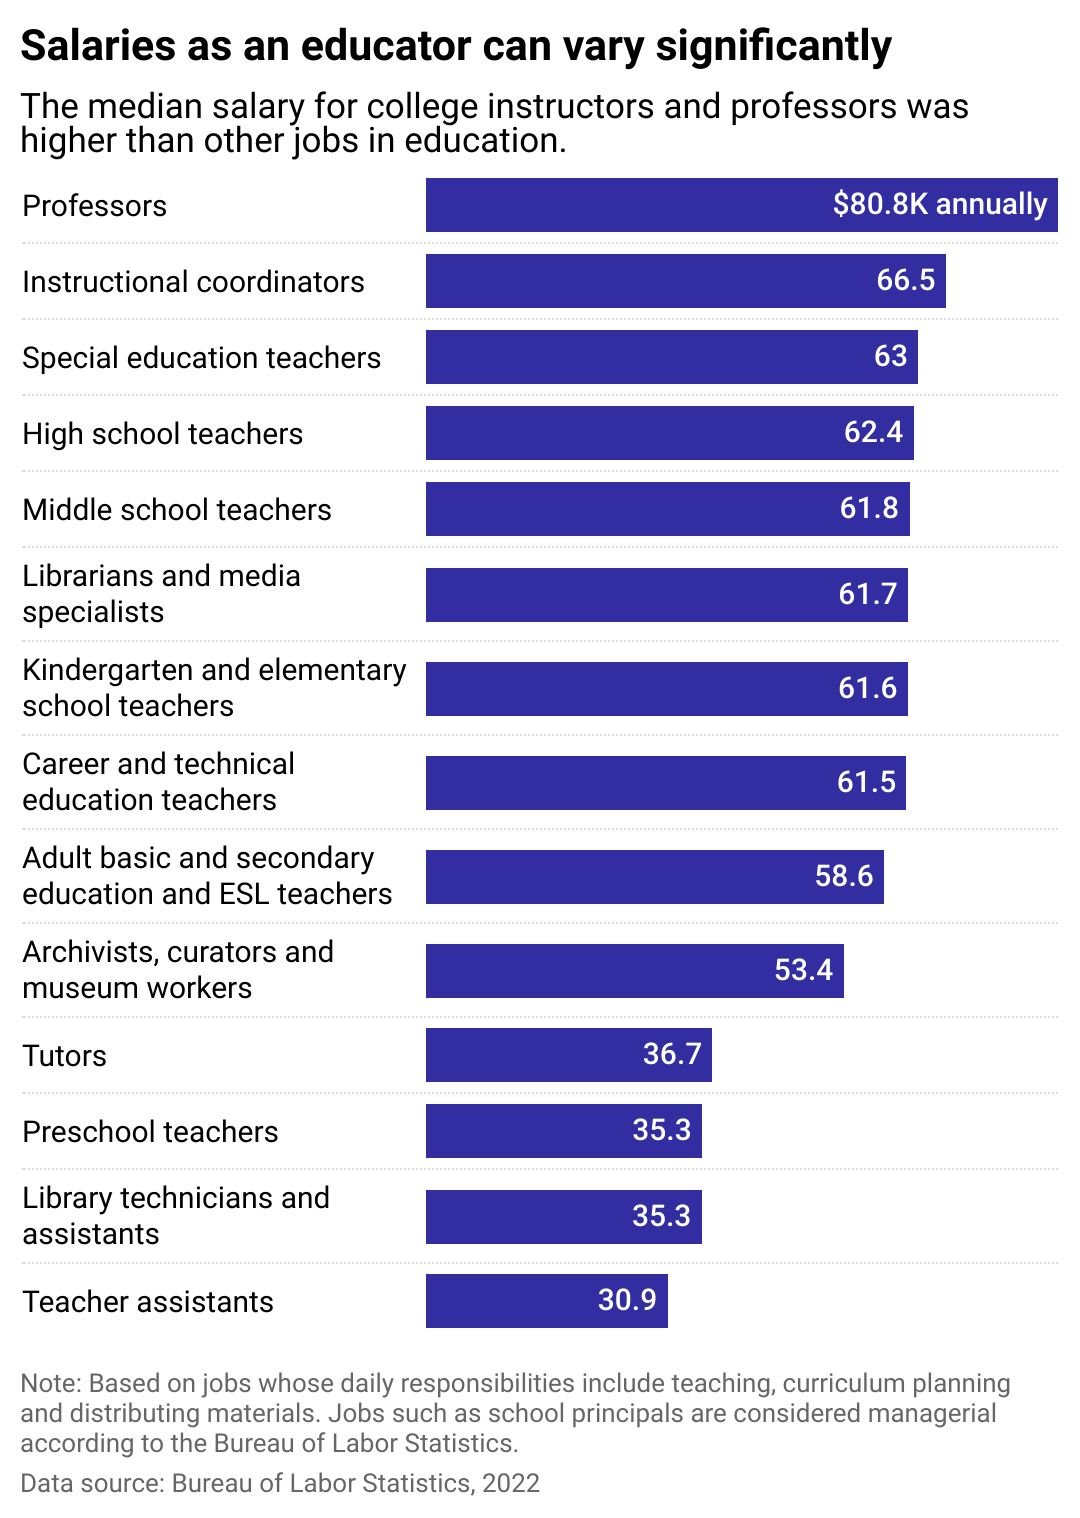 Bar chart showing salaries in the education industry varies significantly. The median salary for educators at the collegiate level was nearly $15,000 higher than the second highest earning job in education.